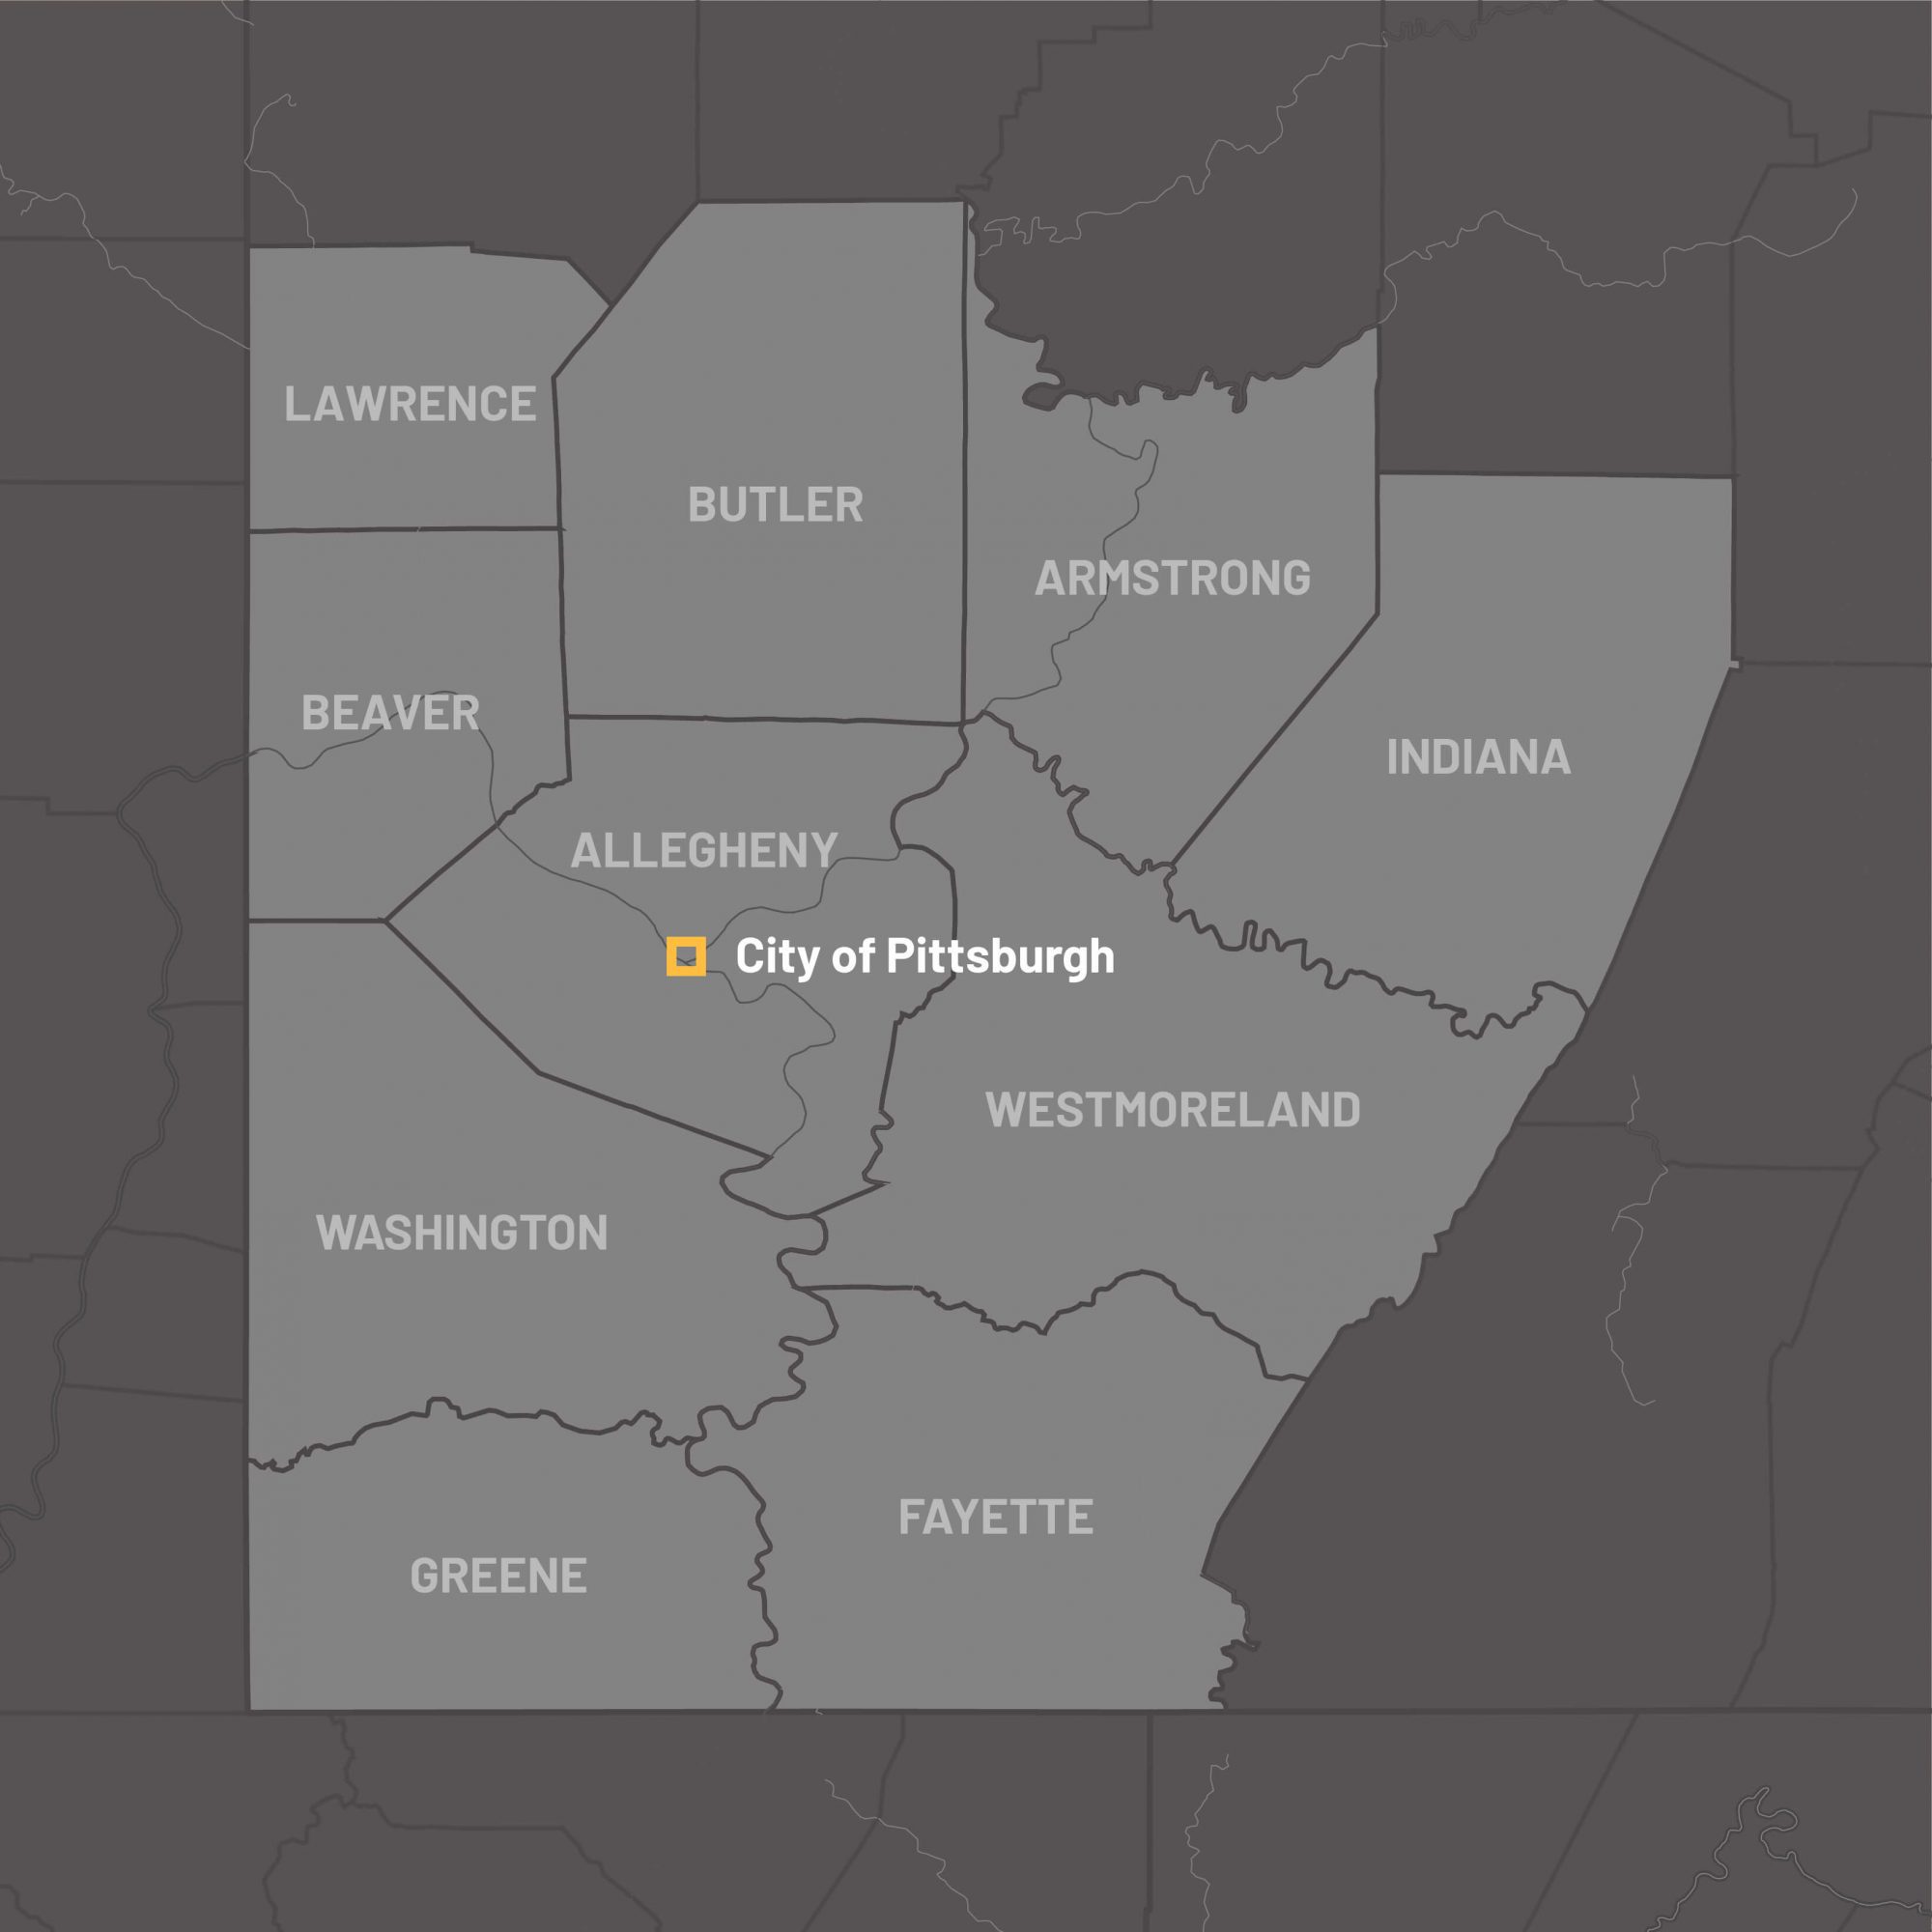 map of pittsburgh regions with city of pittsburgh highlighted, lawrence, butler, armstrong, indiana, beaver, allegheny, westmoreland, washington, greene, fayette